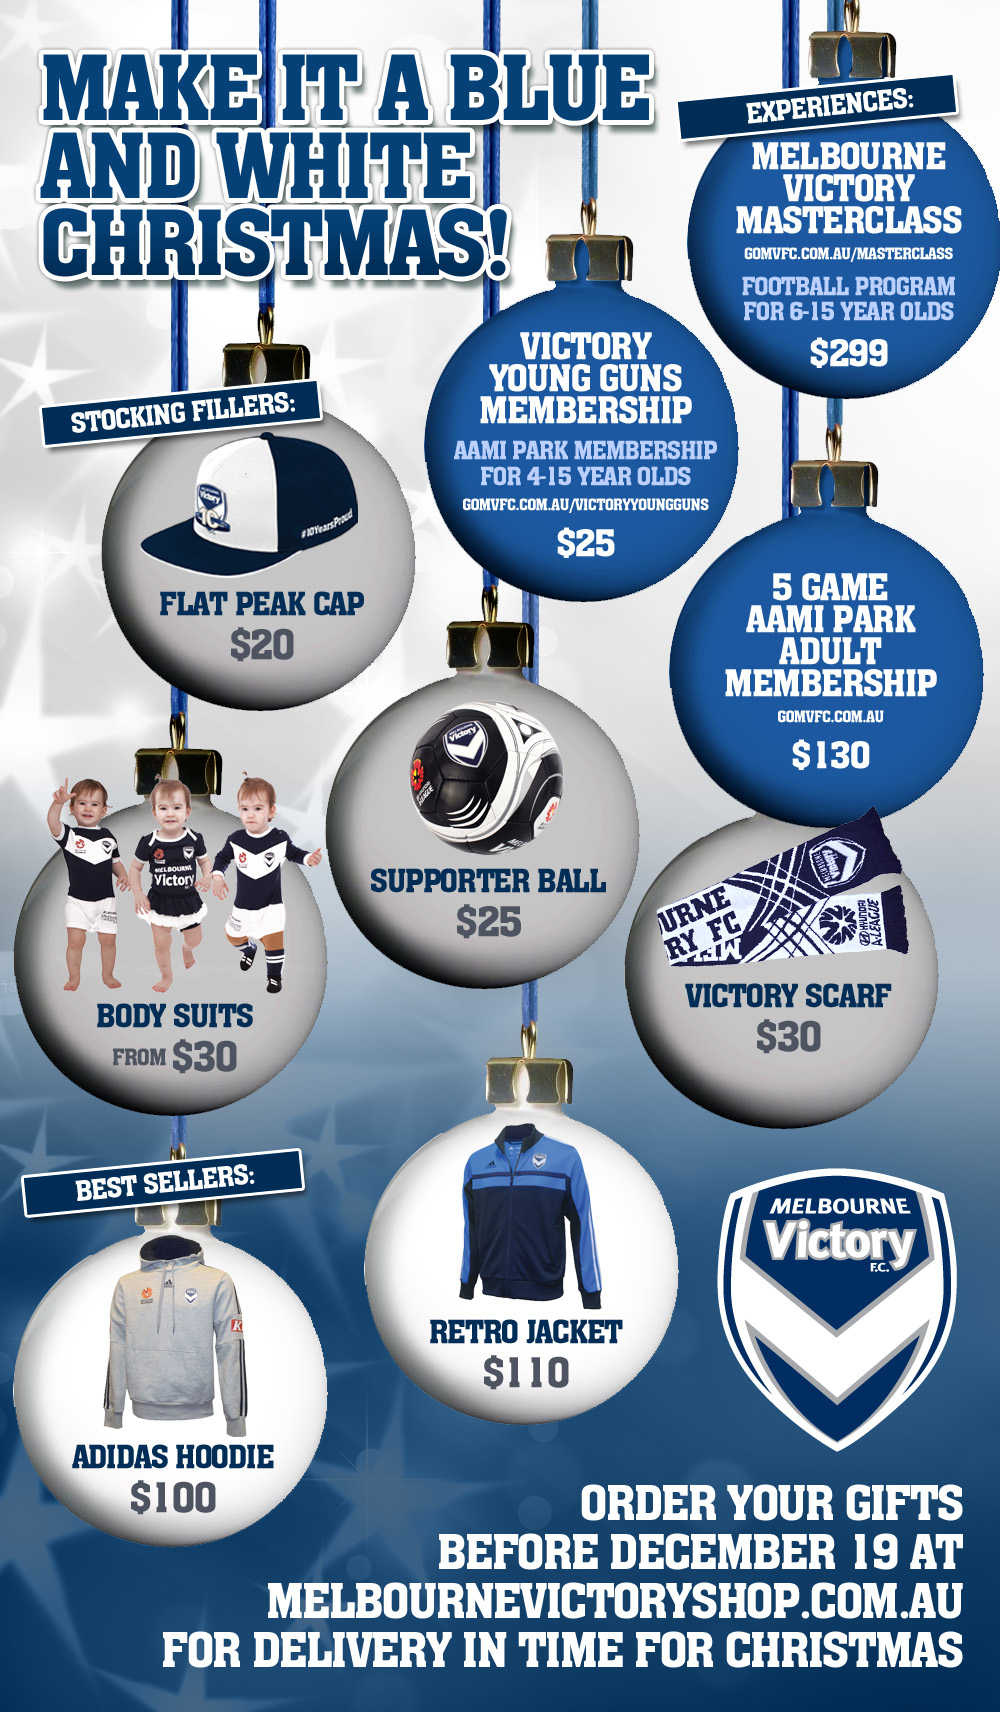 Melbourne Victory Christmas 2